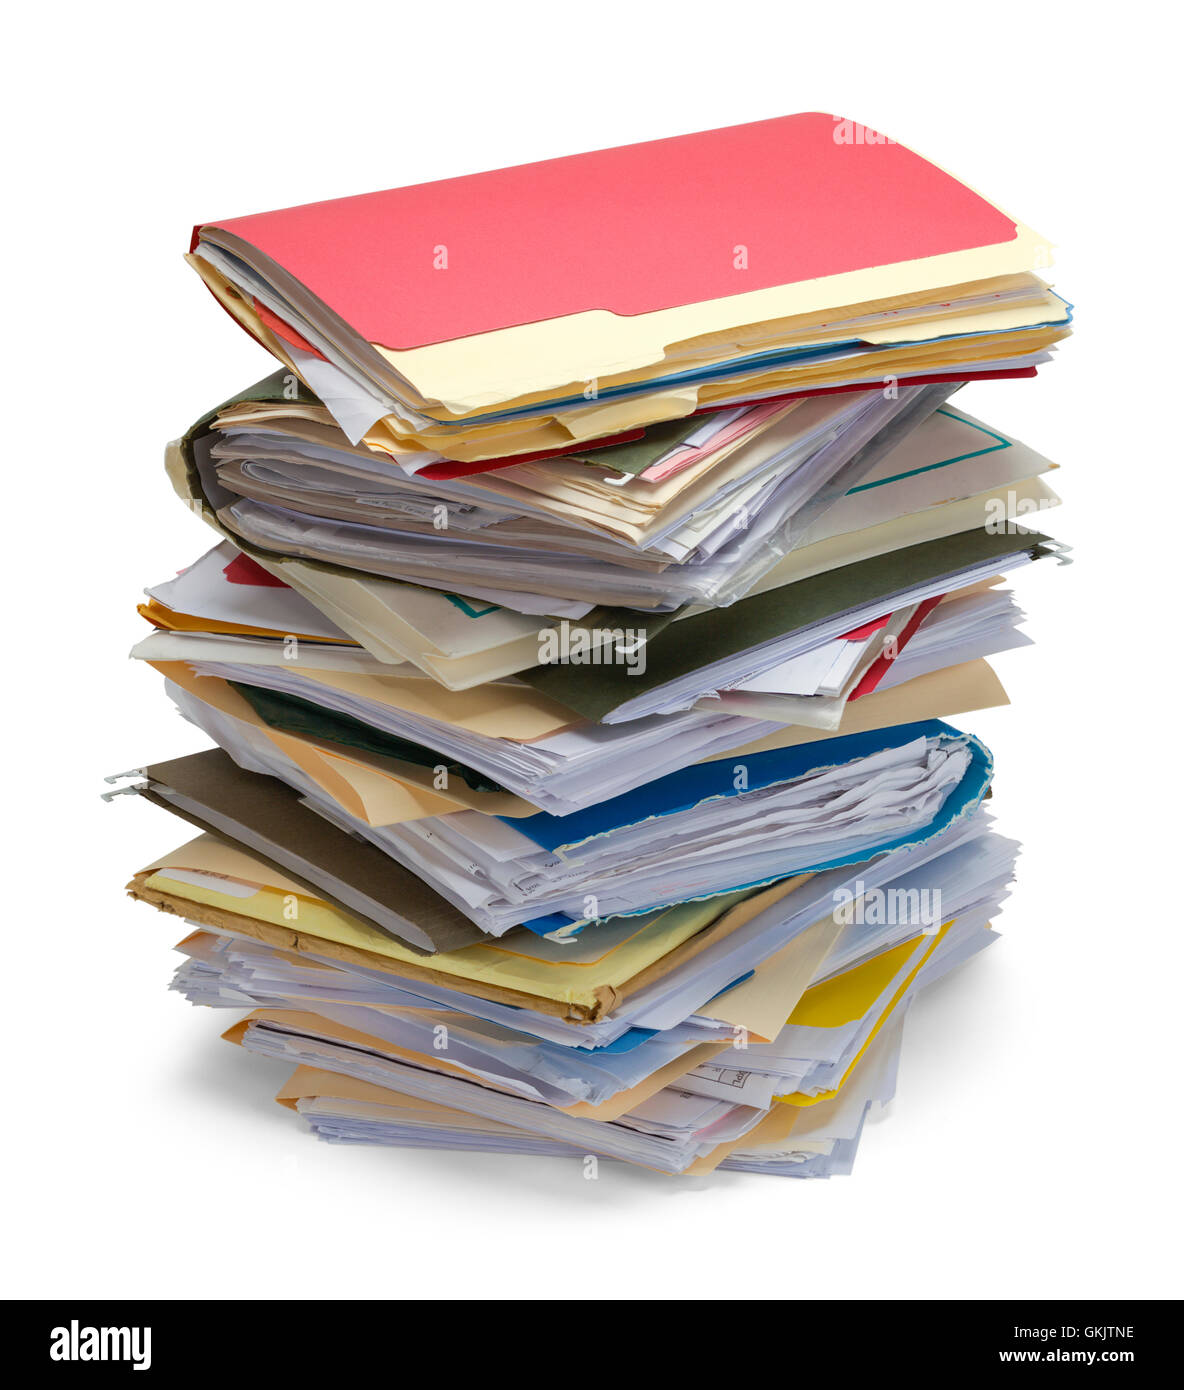 Large Stack Of Messy Files Isolated on White Background. Stock Photo